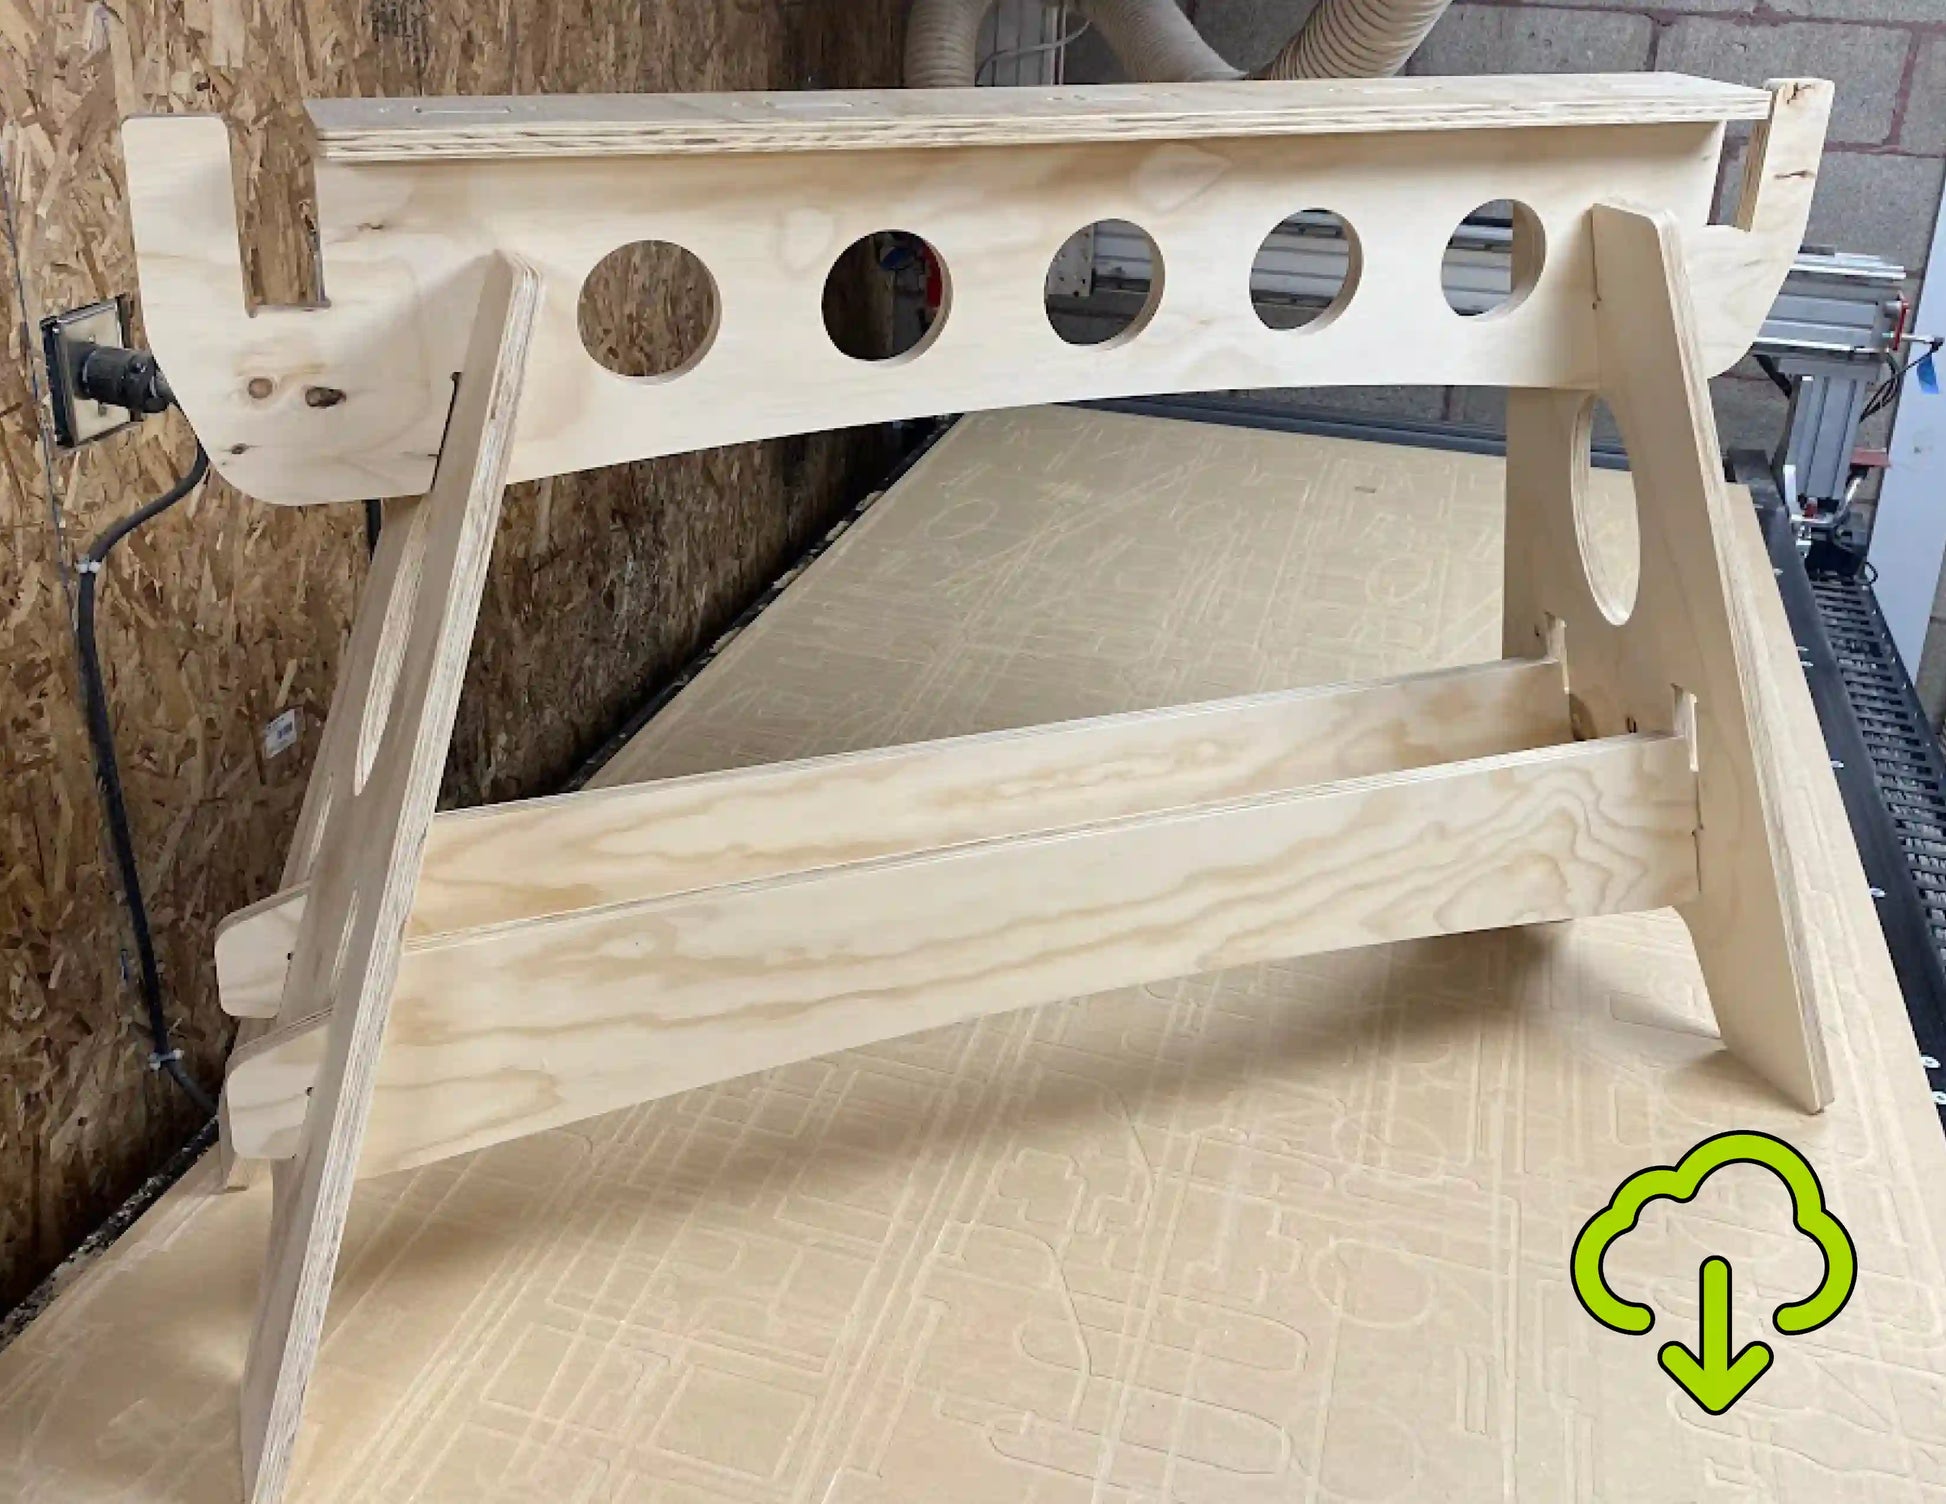 cnc sawhorse plans to make a set of plywood sawhorses on a cnc wood router machine